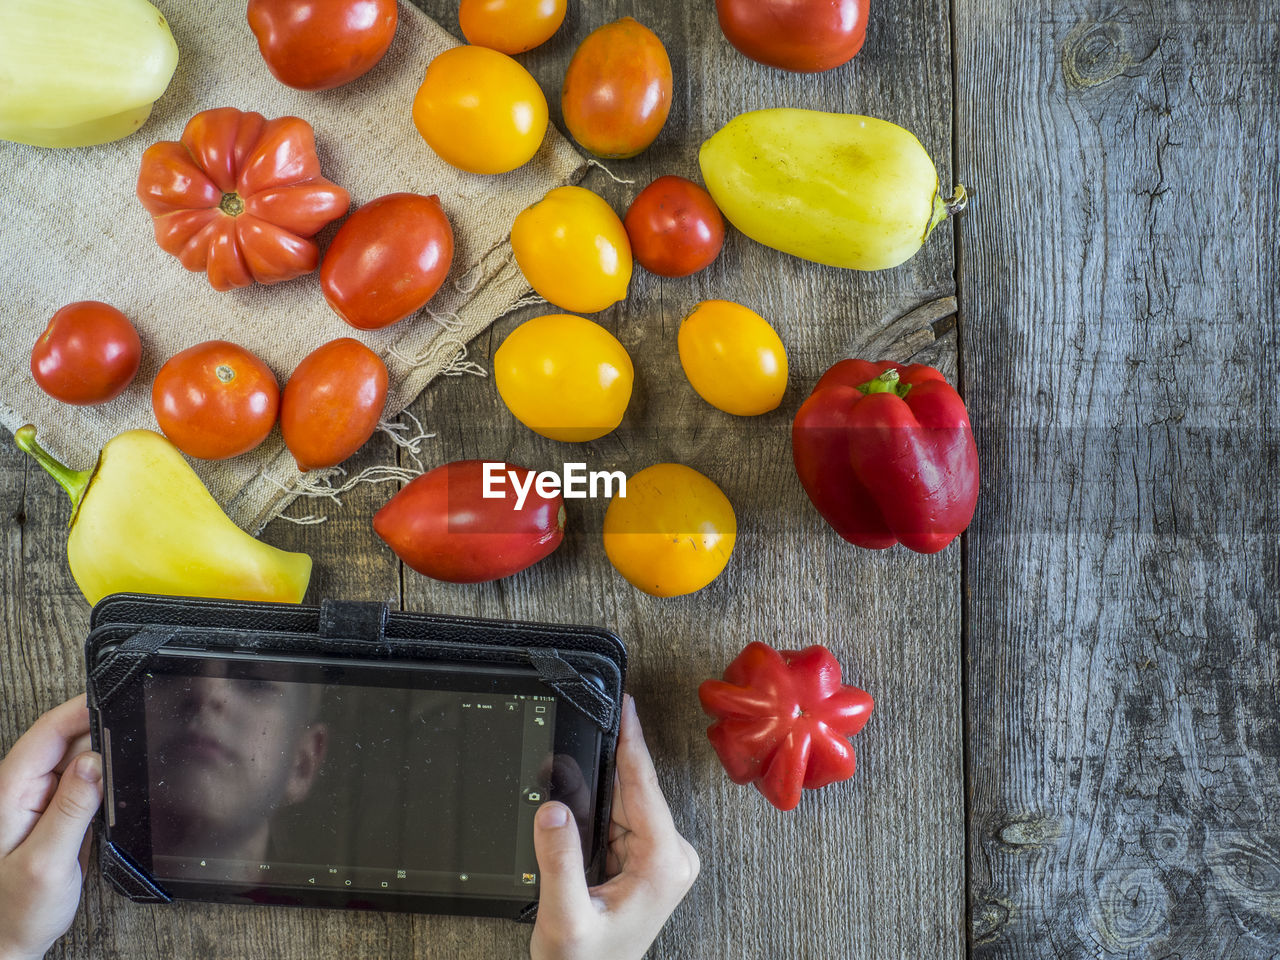 Reflection of man on digital tablet by fresh vegetables on table